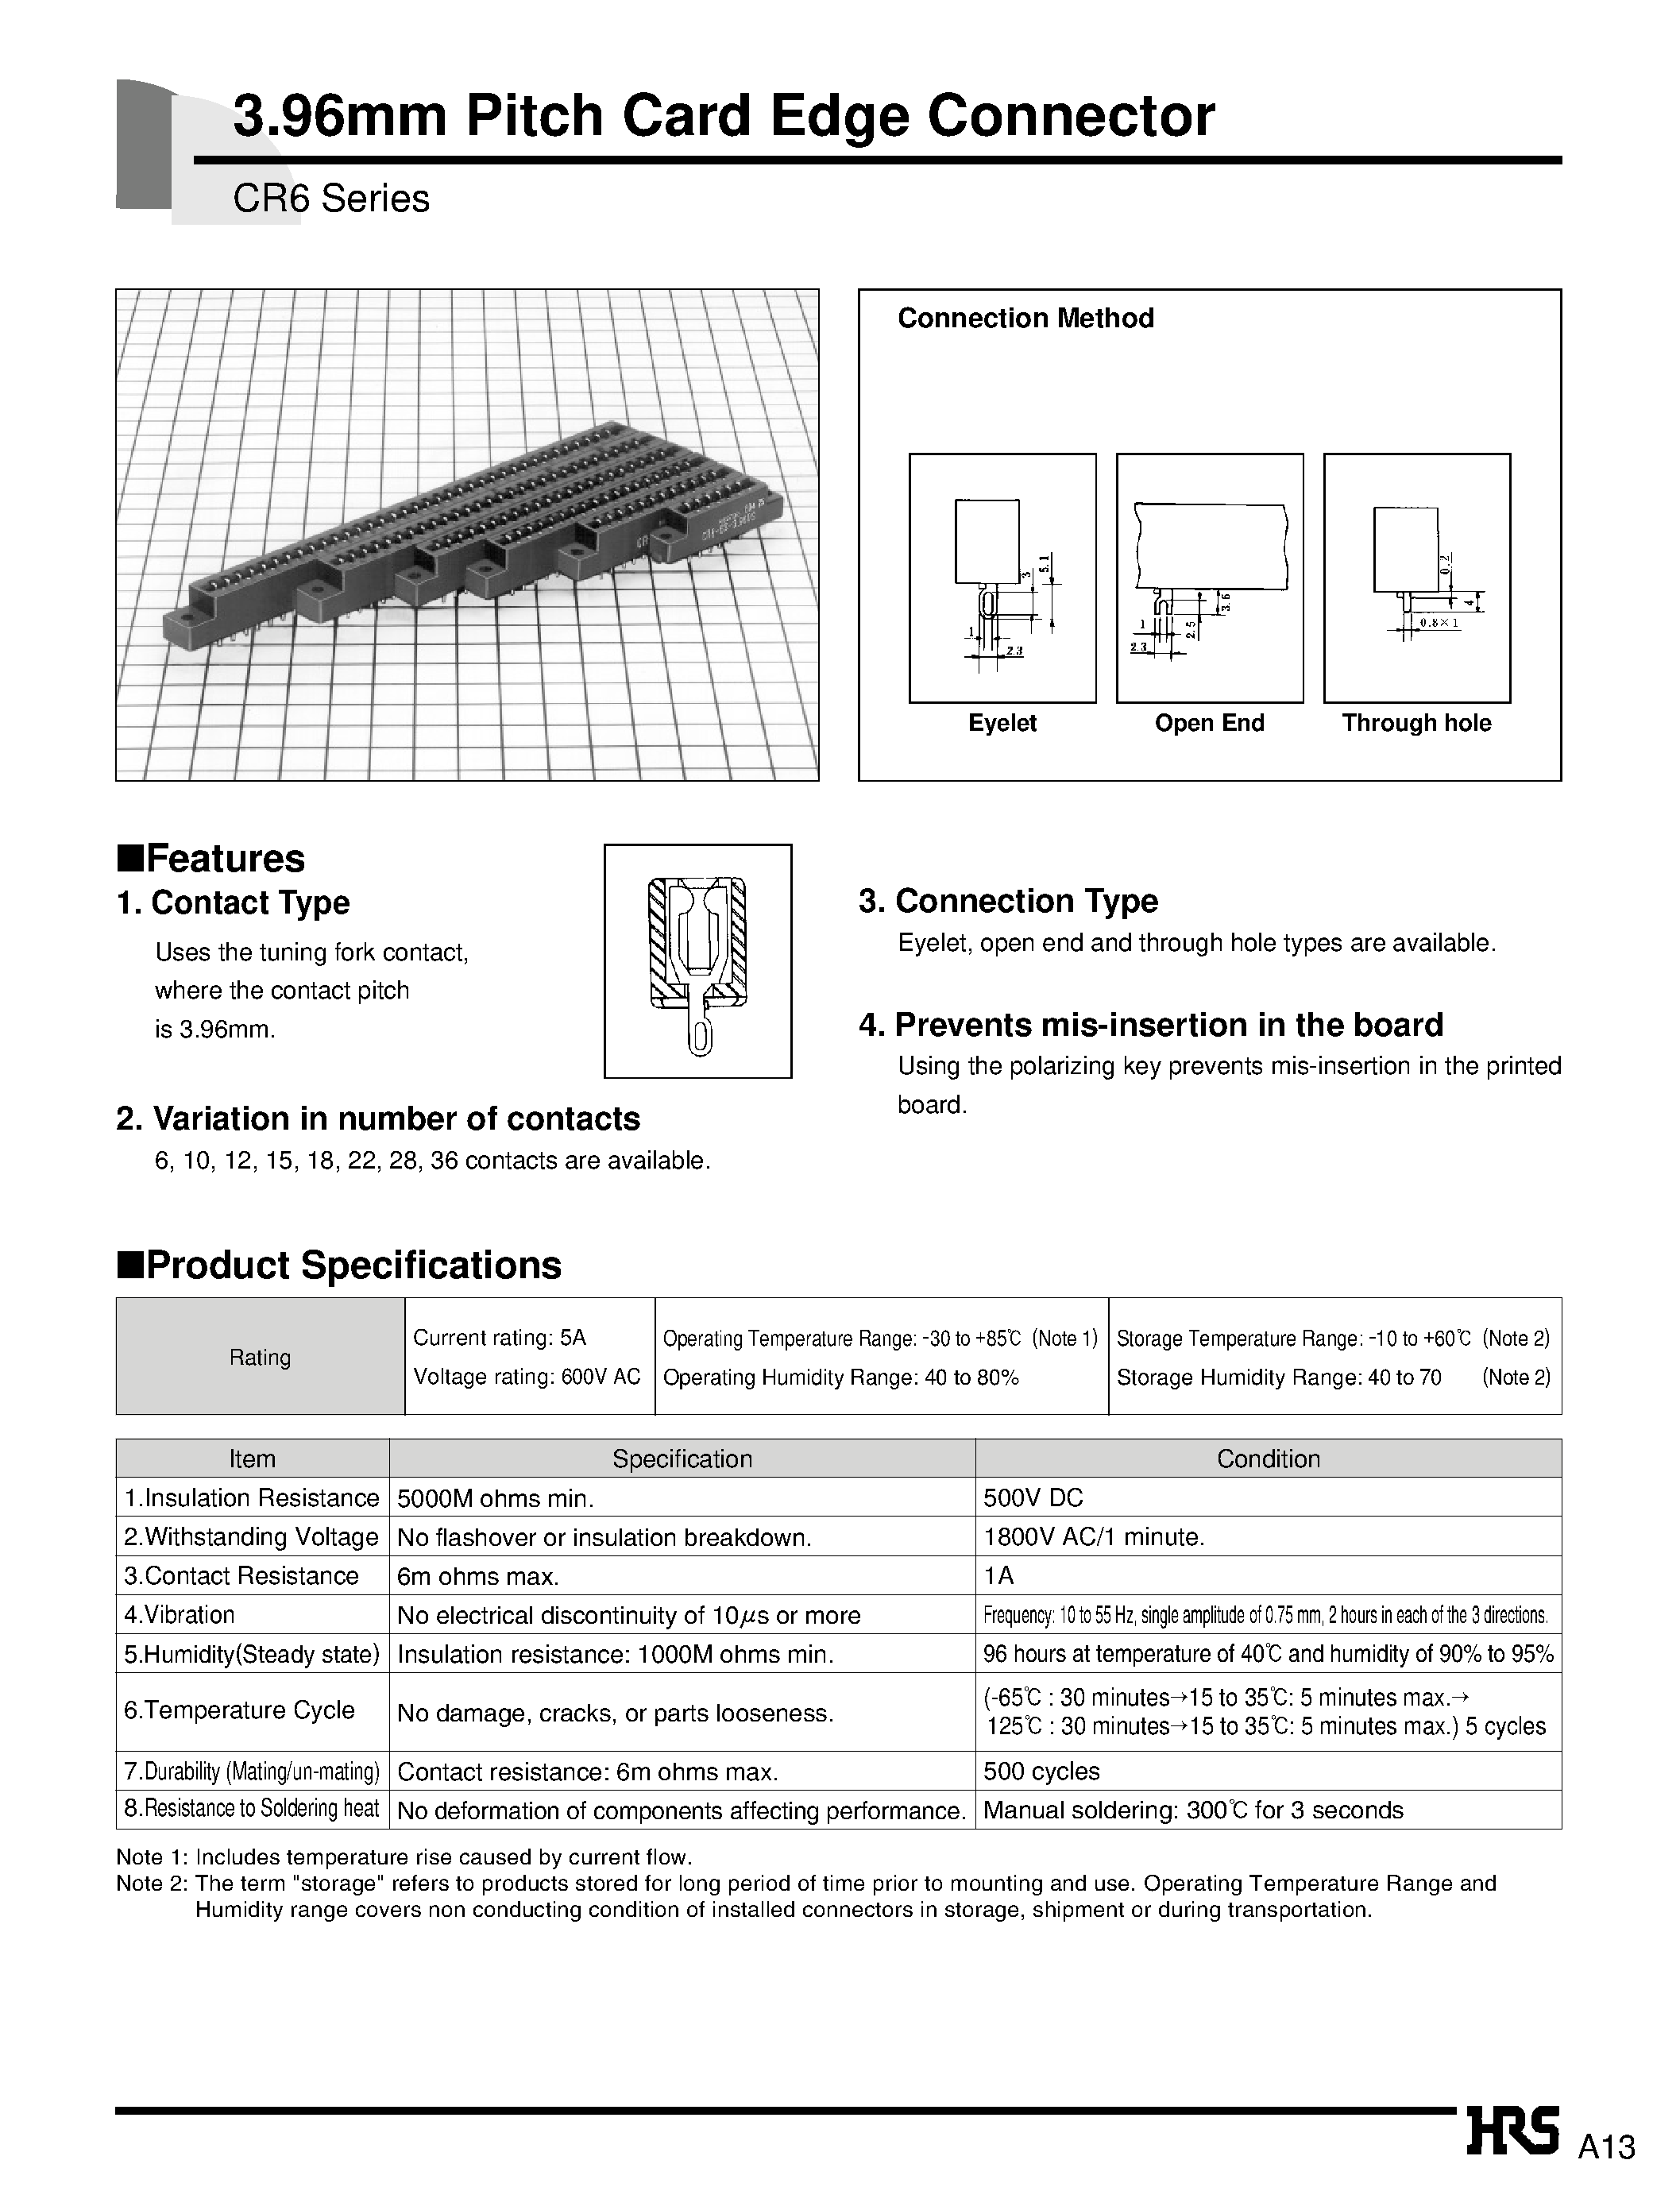 Datasheet CR6-36S-3.96DS - 3.96mm Pitch Card Edge Connector page 1